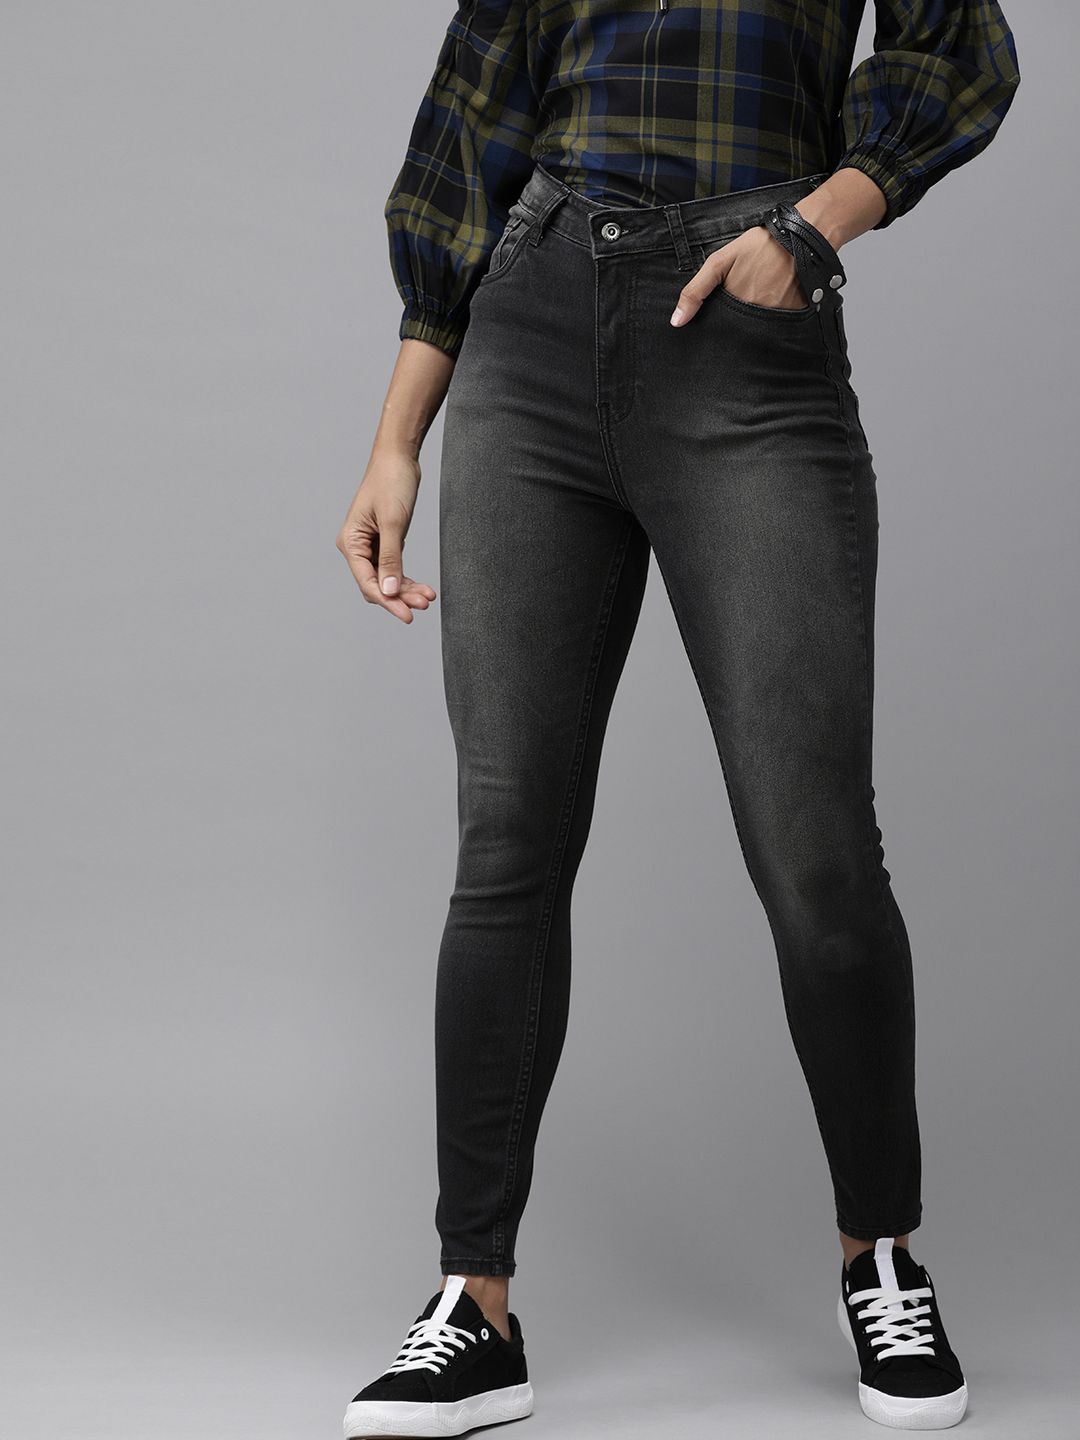 Roadster Women Black Skinny Fit High-Rise Clean Look Stretchable Cropped Jeans Price in India